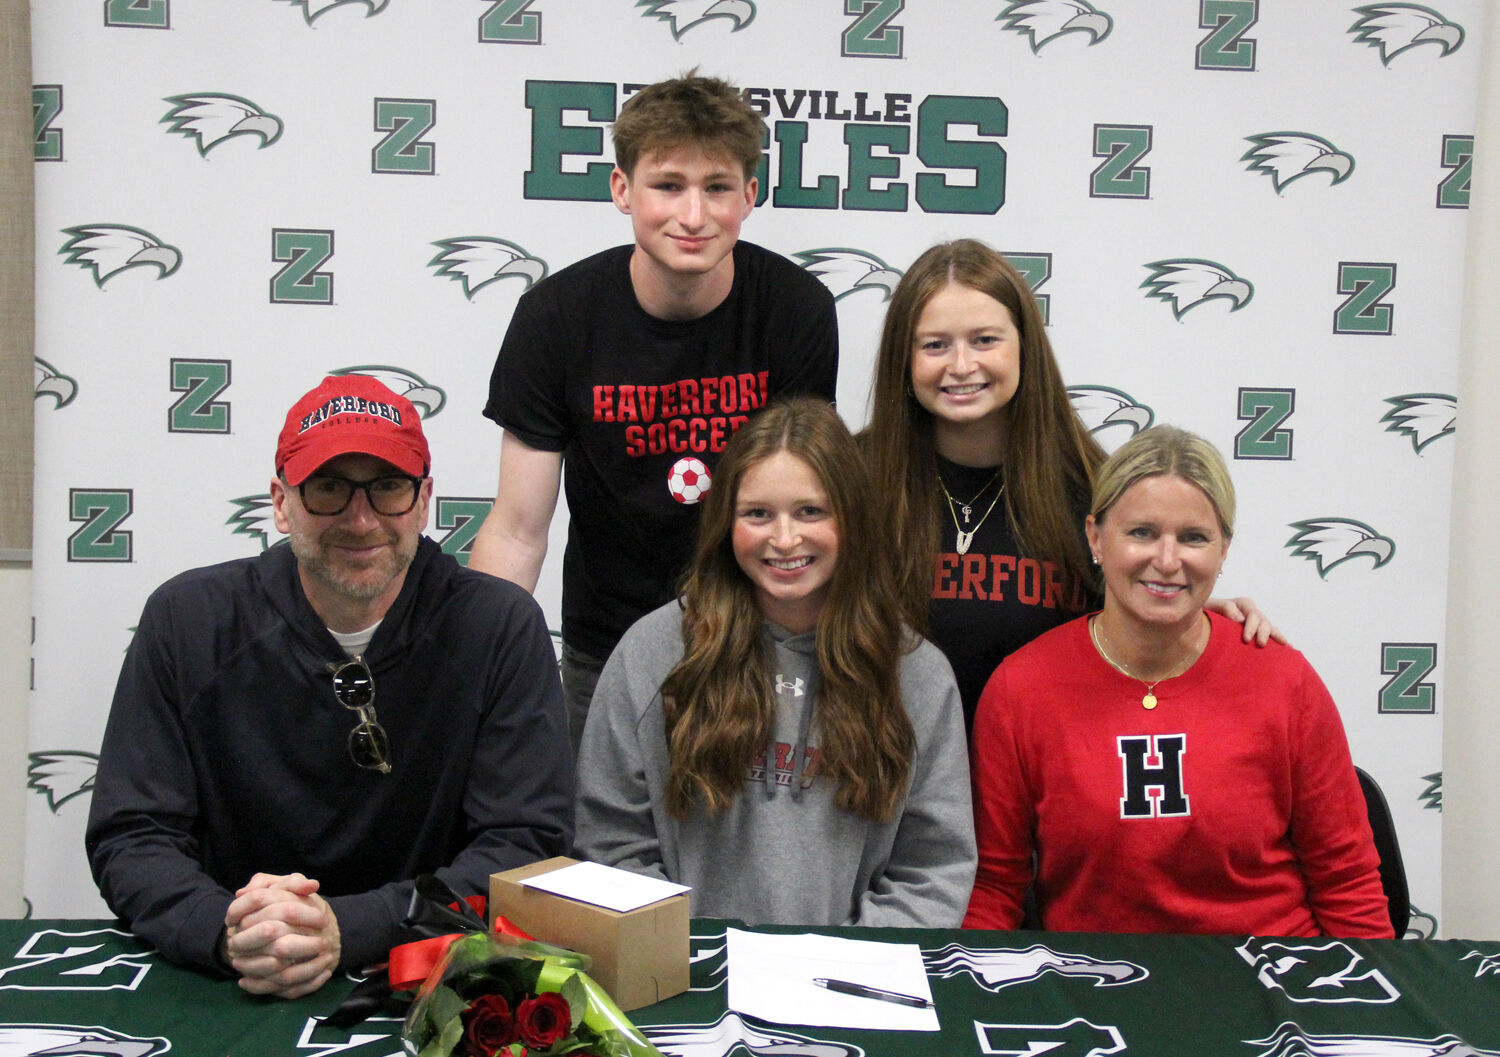 King signs with Haverford to continue tennis career